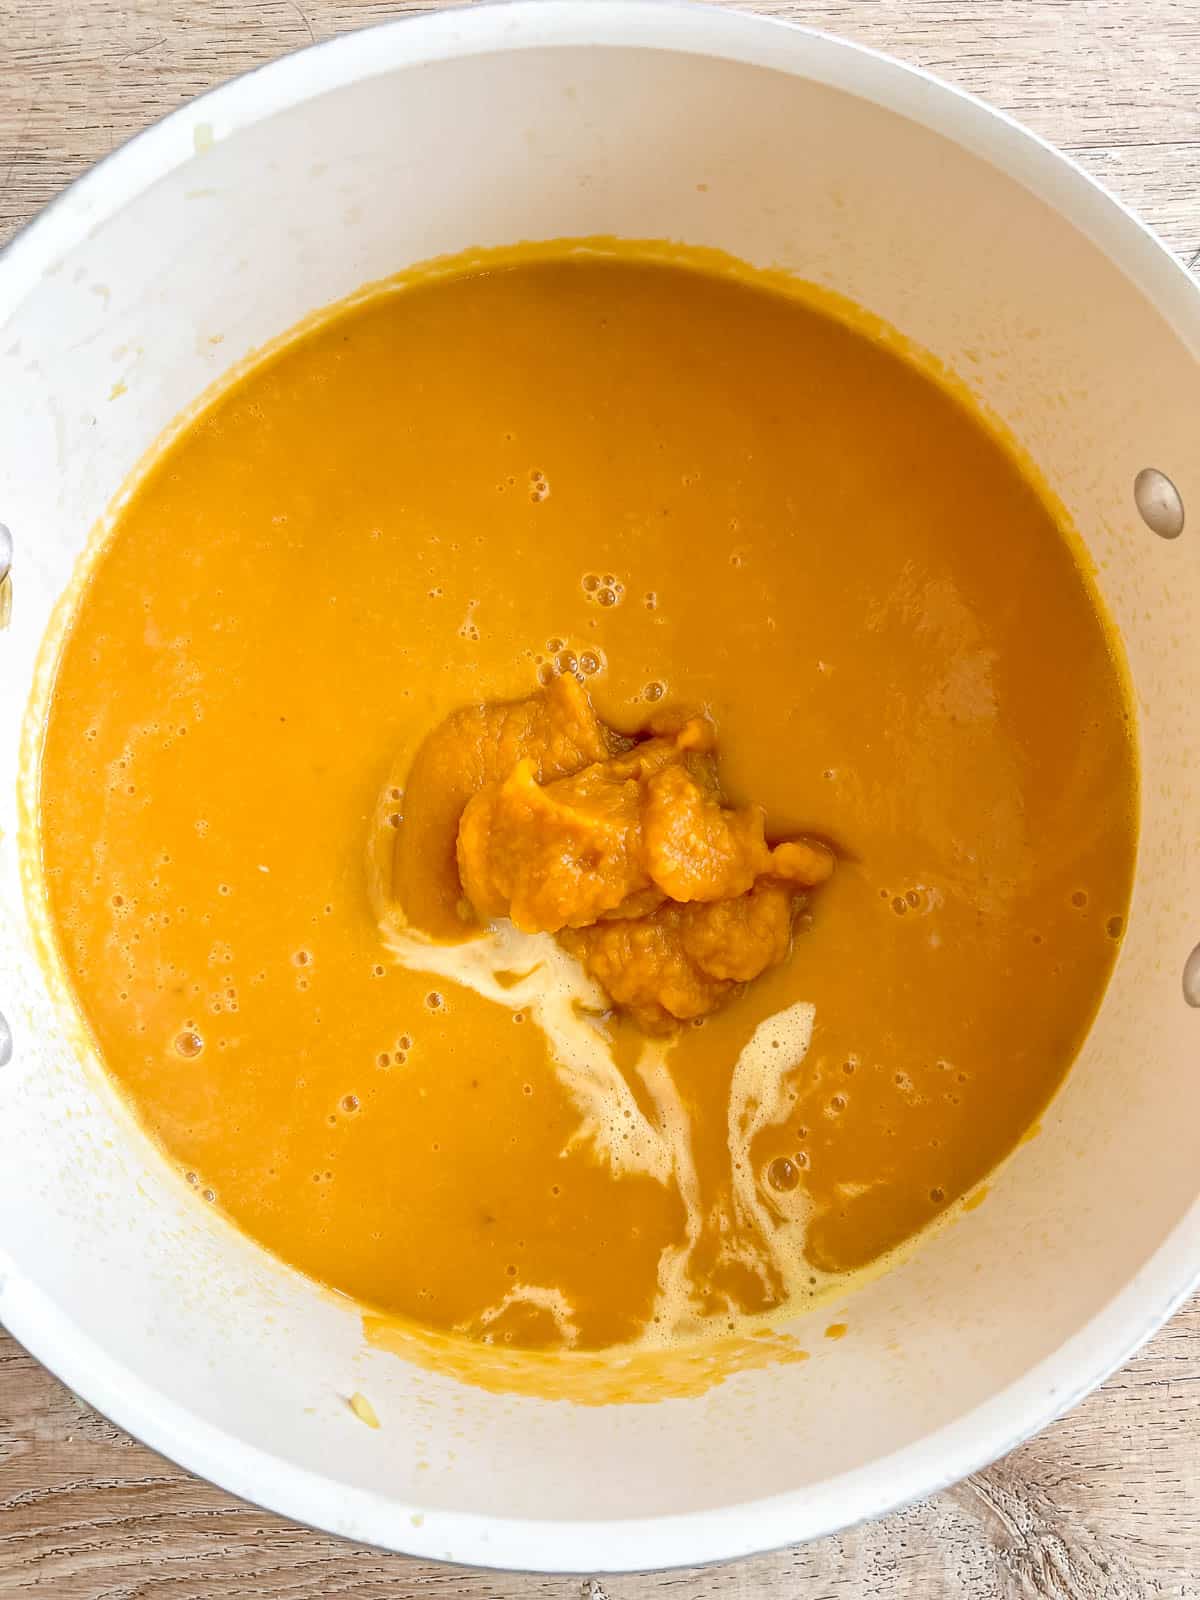 Pumpkin puree and cream added to soup.